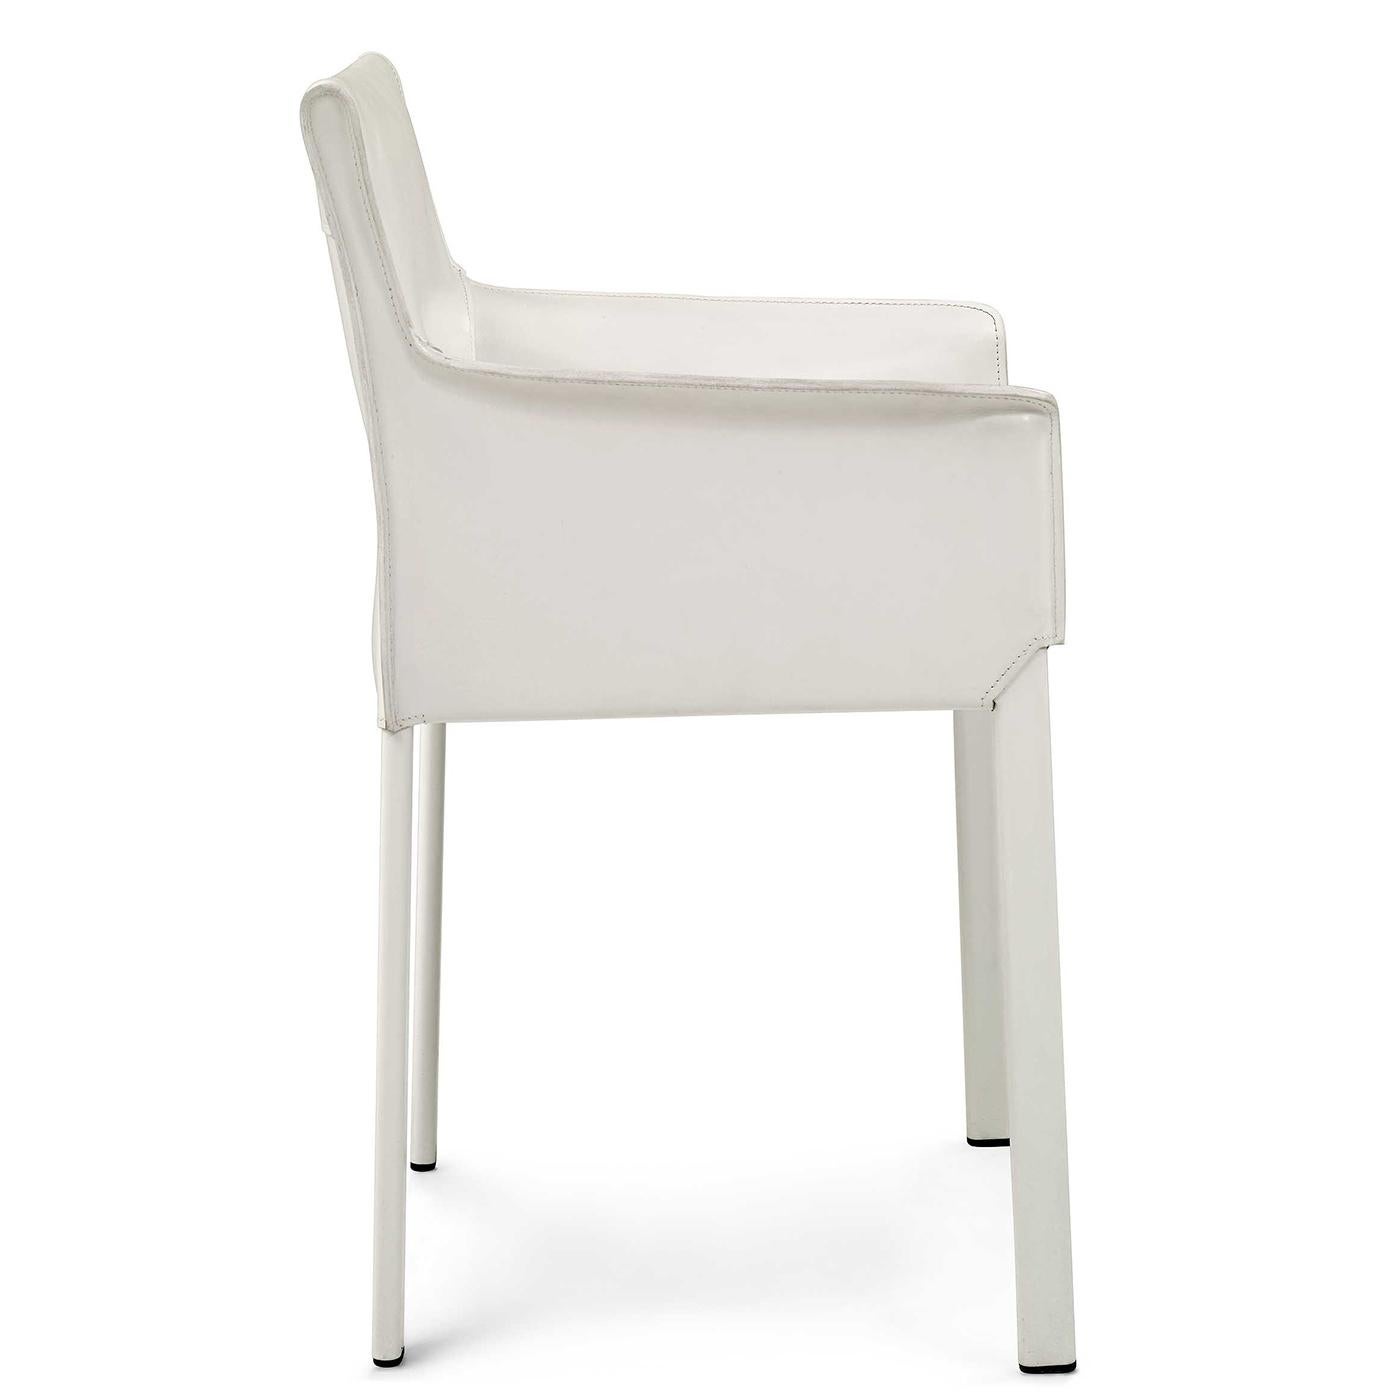 This Minimalist, steel-frame armchair features a seat and back covered in white leather, along with a metal seat pan enveloped in black technical fabric. Its four, flat, thin, metal legs are painted in glossy white. Alternative colors and finishings